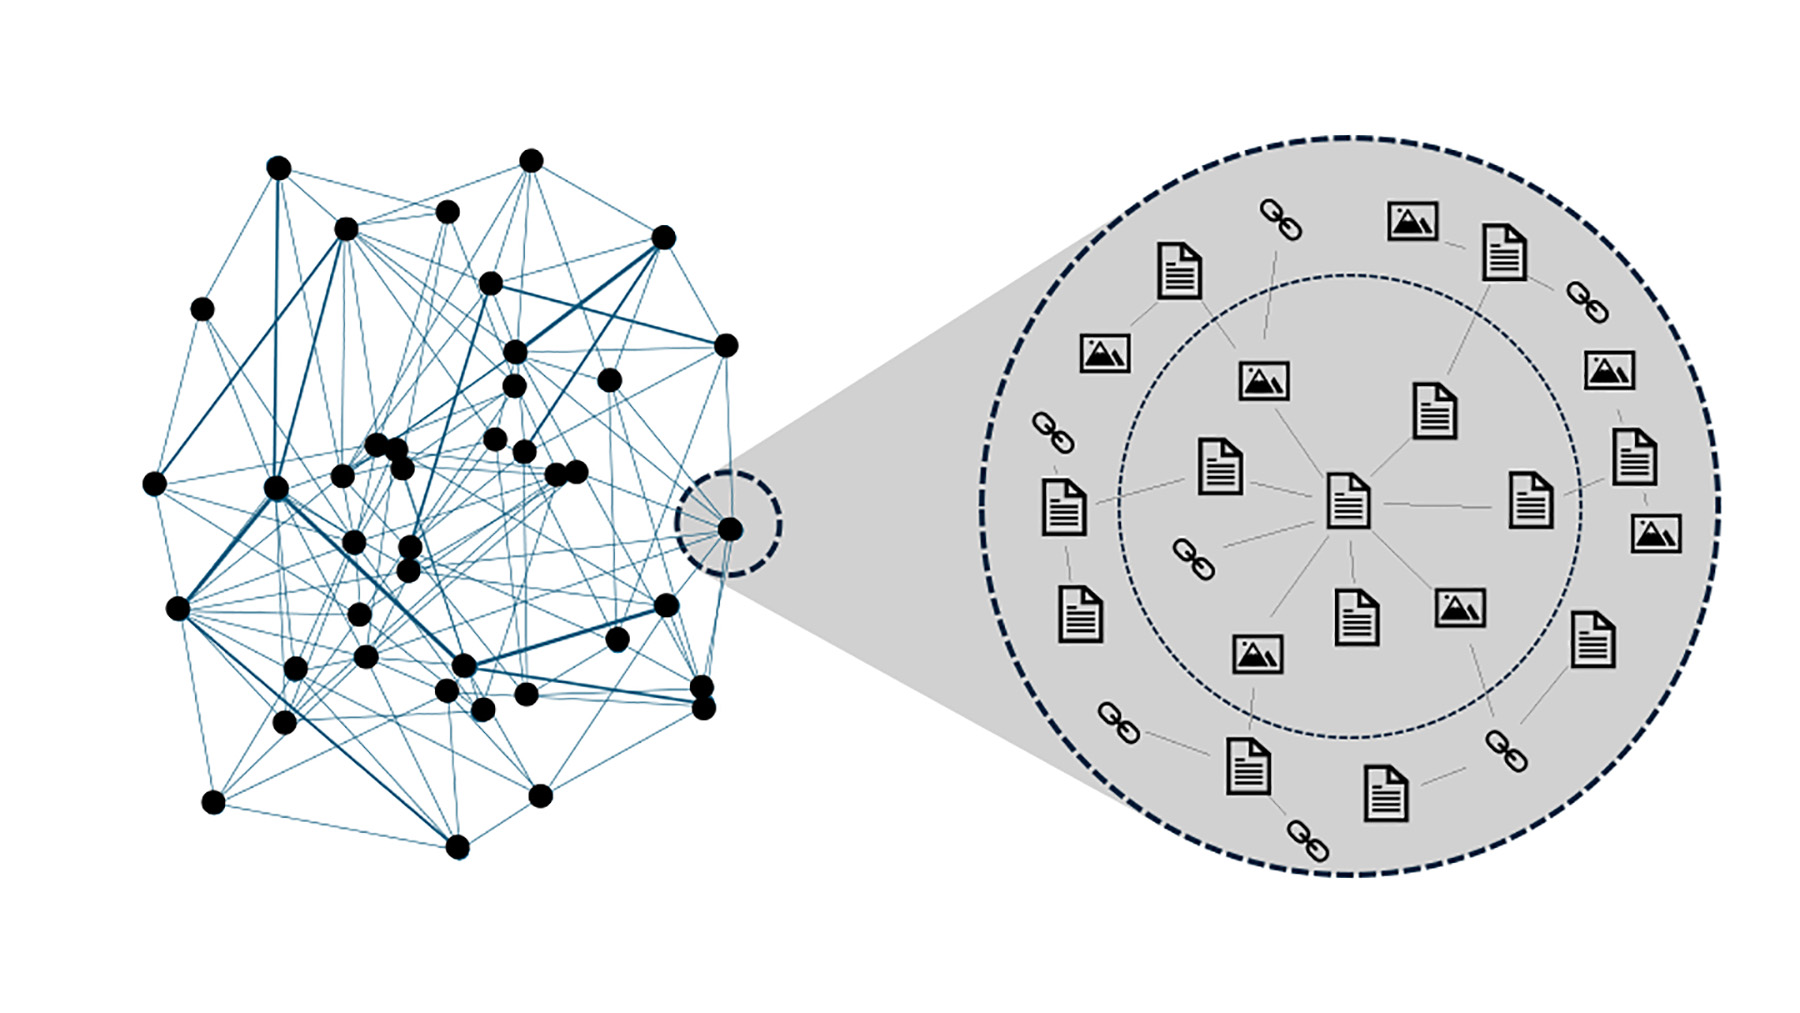 Image shows model network mapping of tokenized content. 